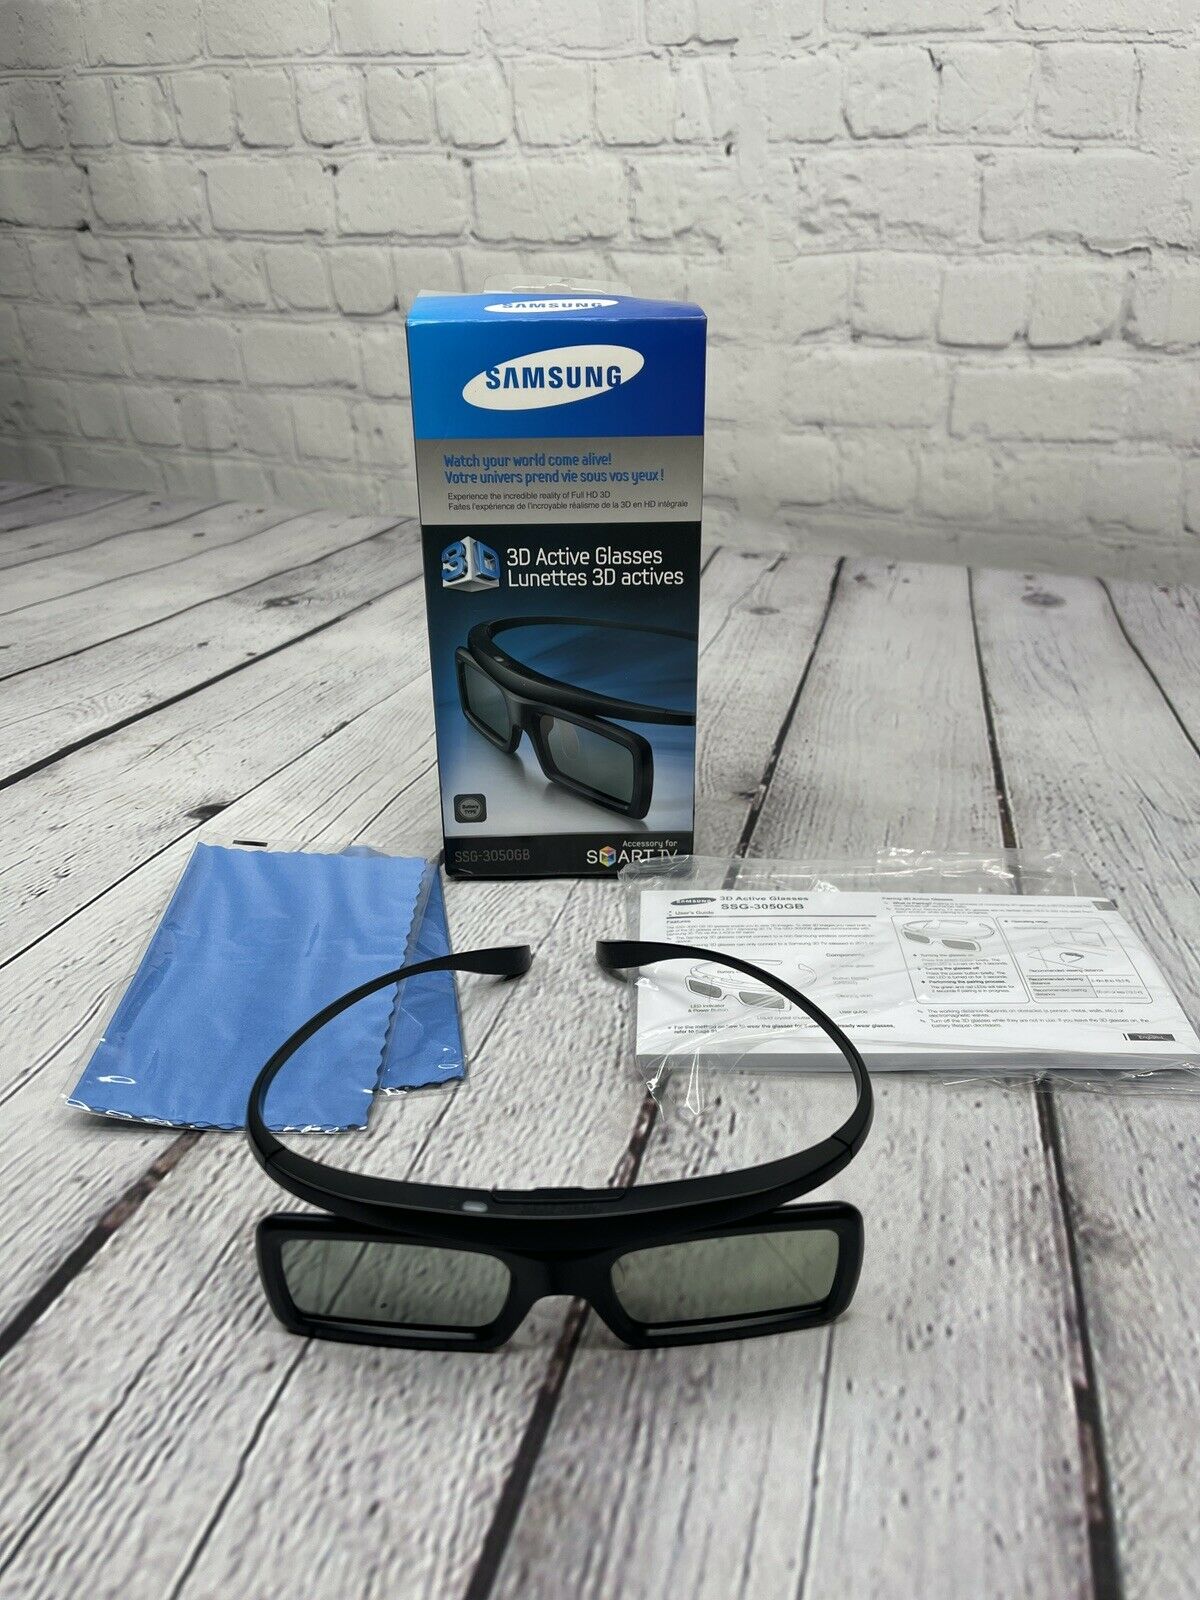 Samsung Ssg-3050gb 3d Active Glasses For Smart Tv Euc Free Shipping